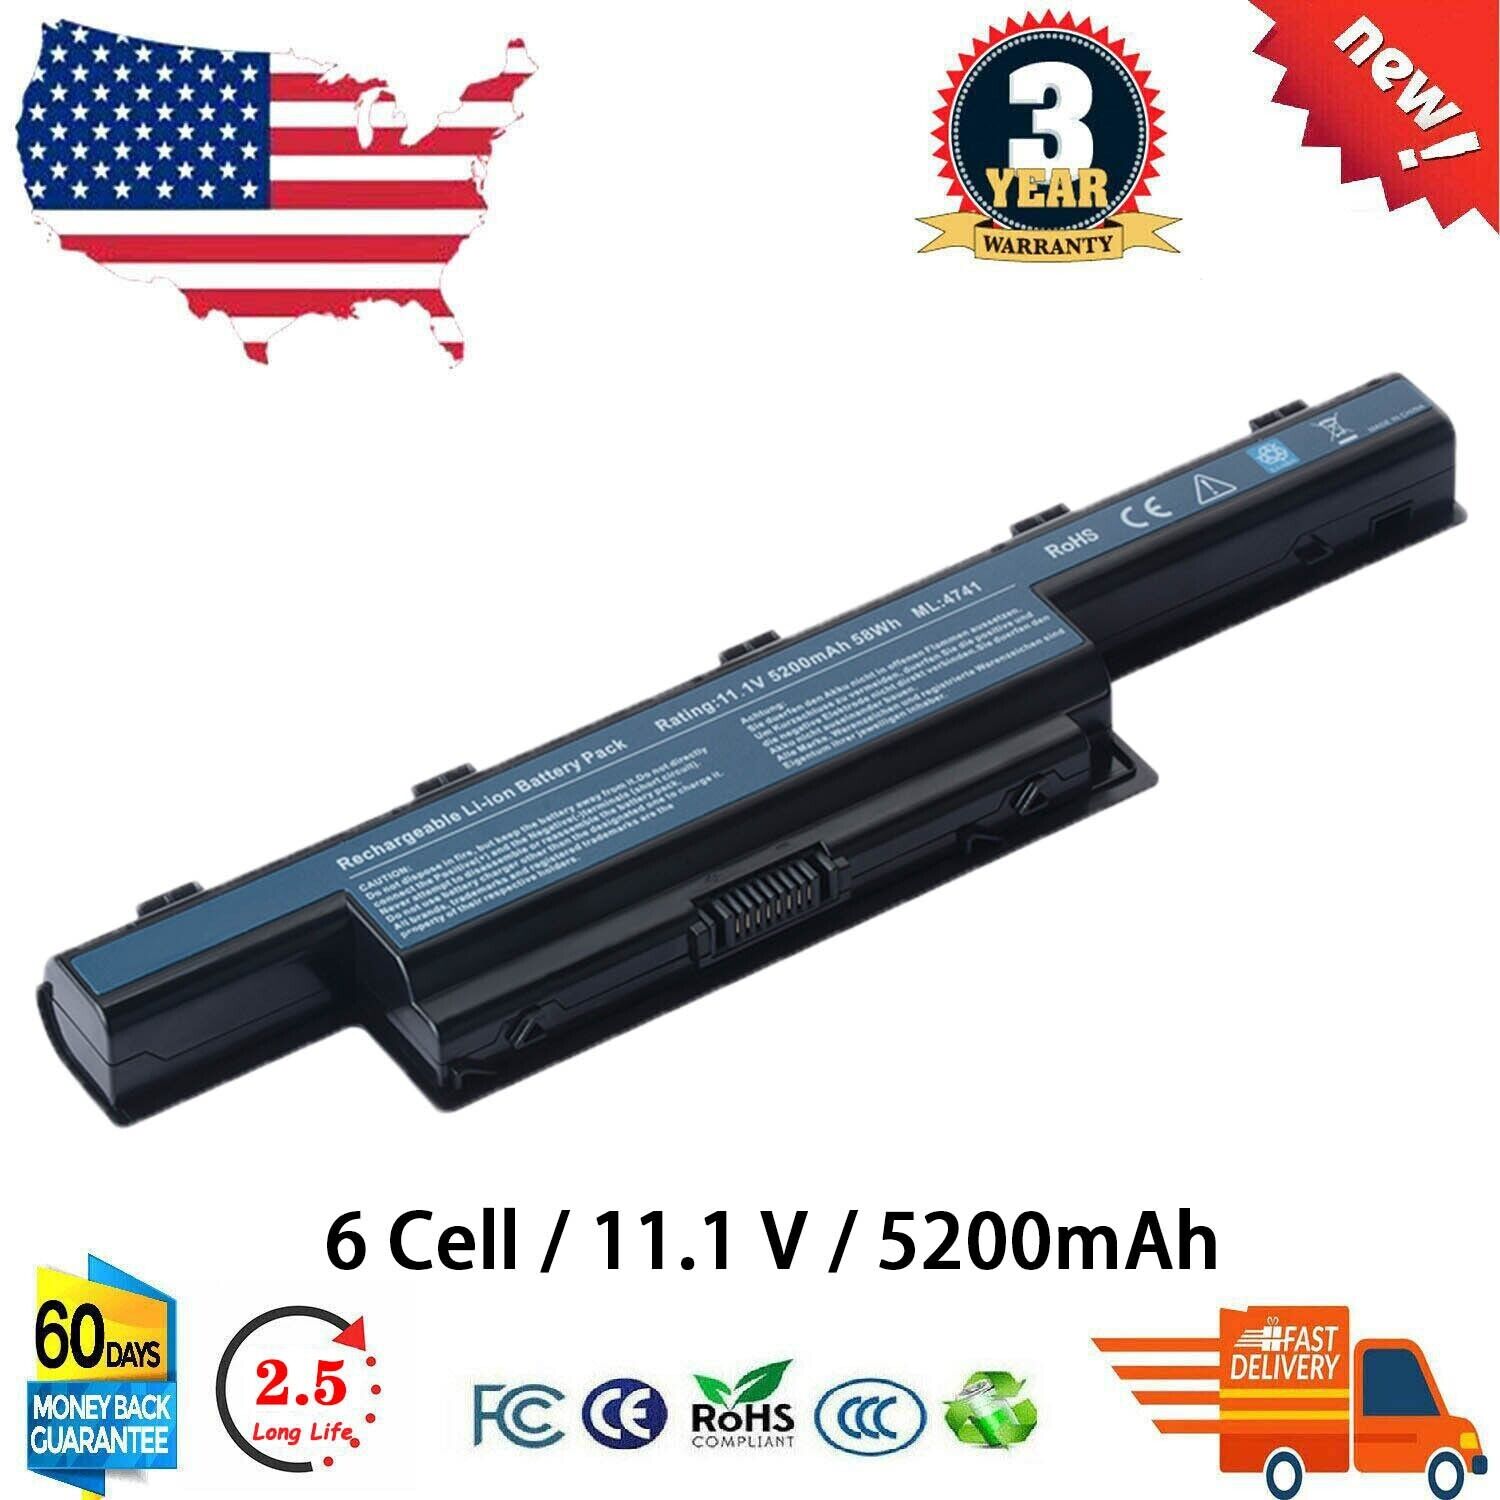 Laptop Battery for Acer Aspire 4551 4741 5750 7551 7560 7750 AS10D31 AS10D51